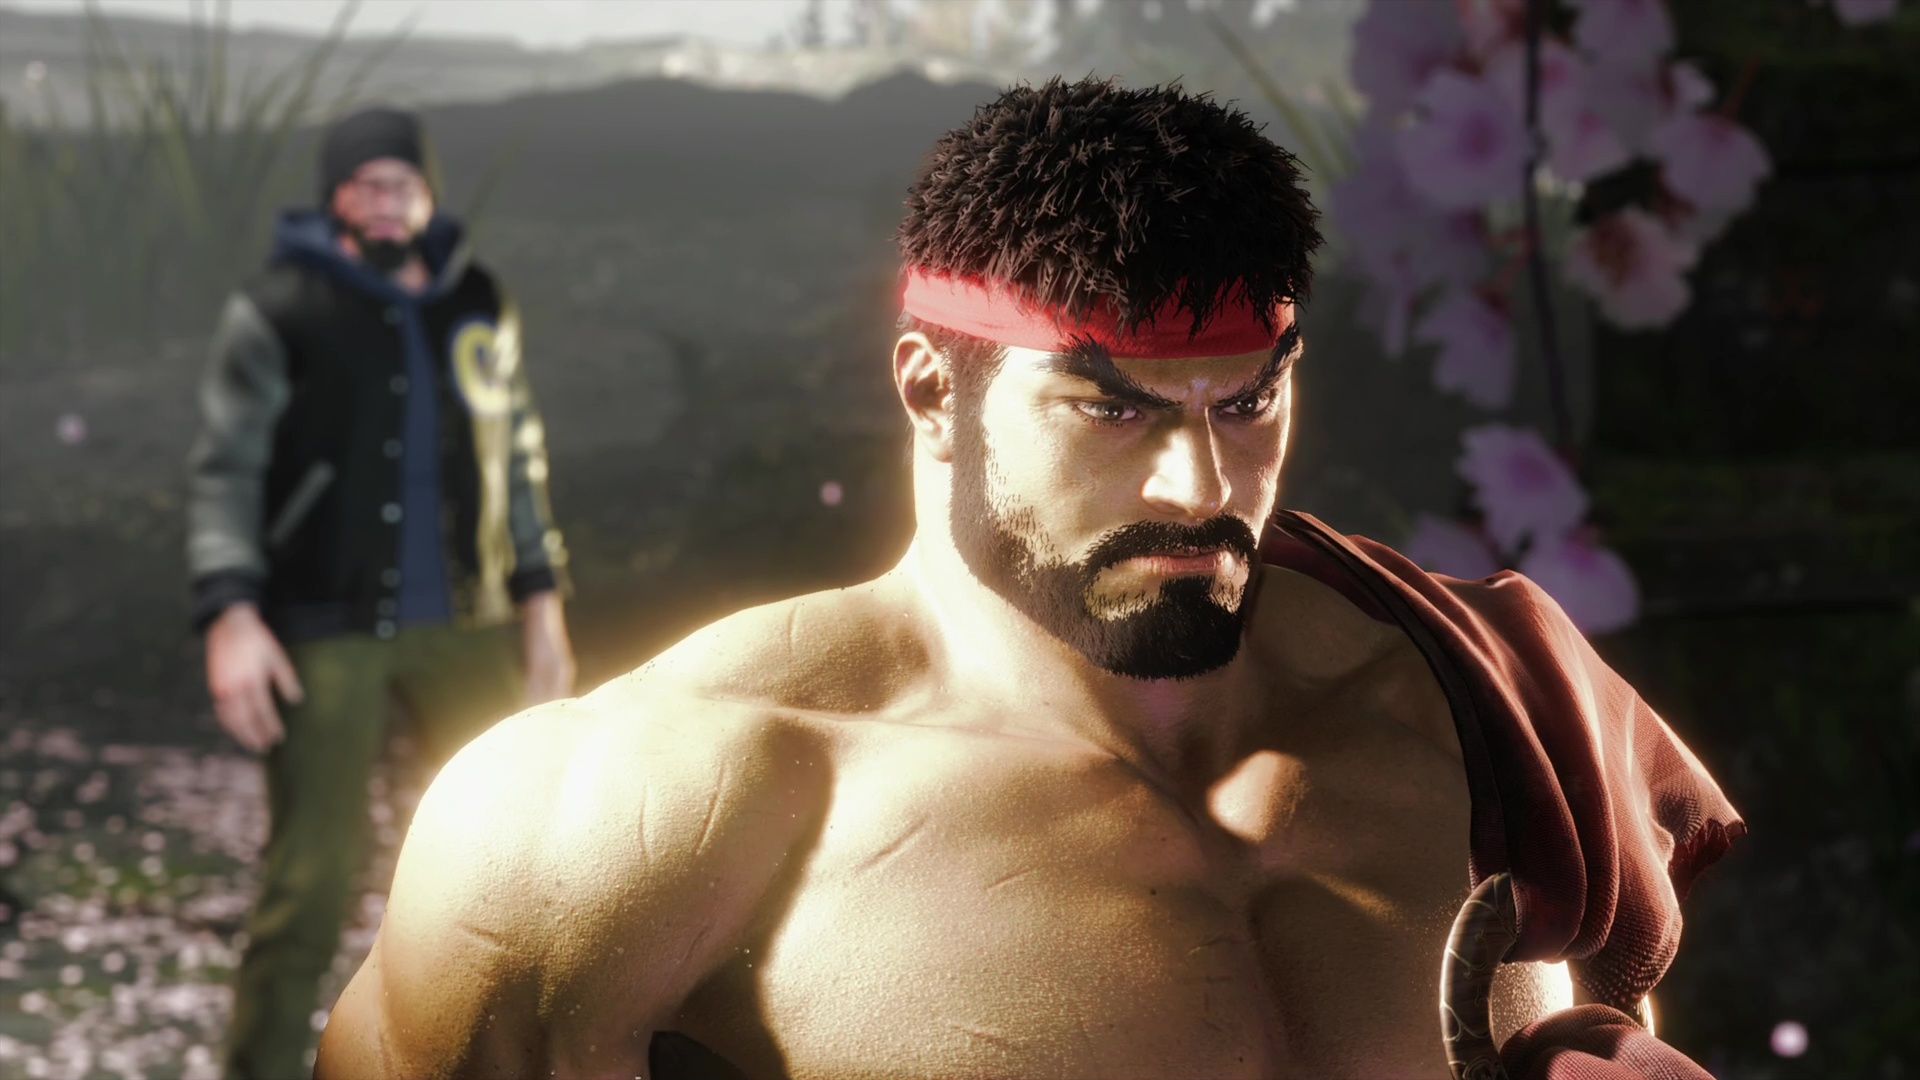 The player meets Ryu in Street Fighter 6's World tour mode. 